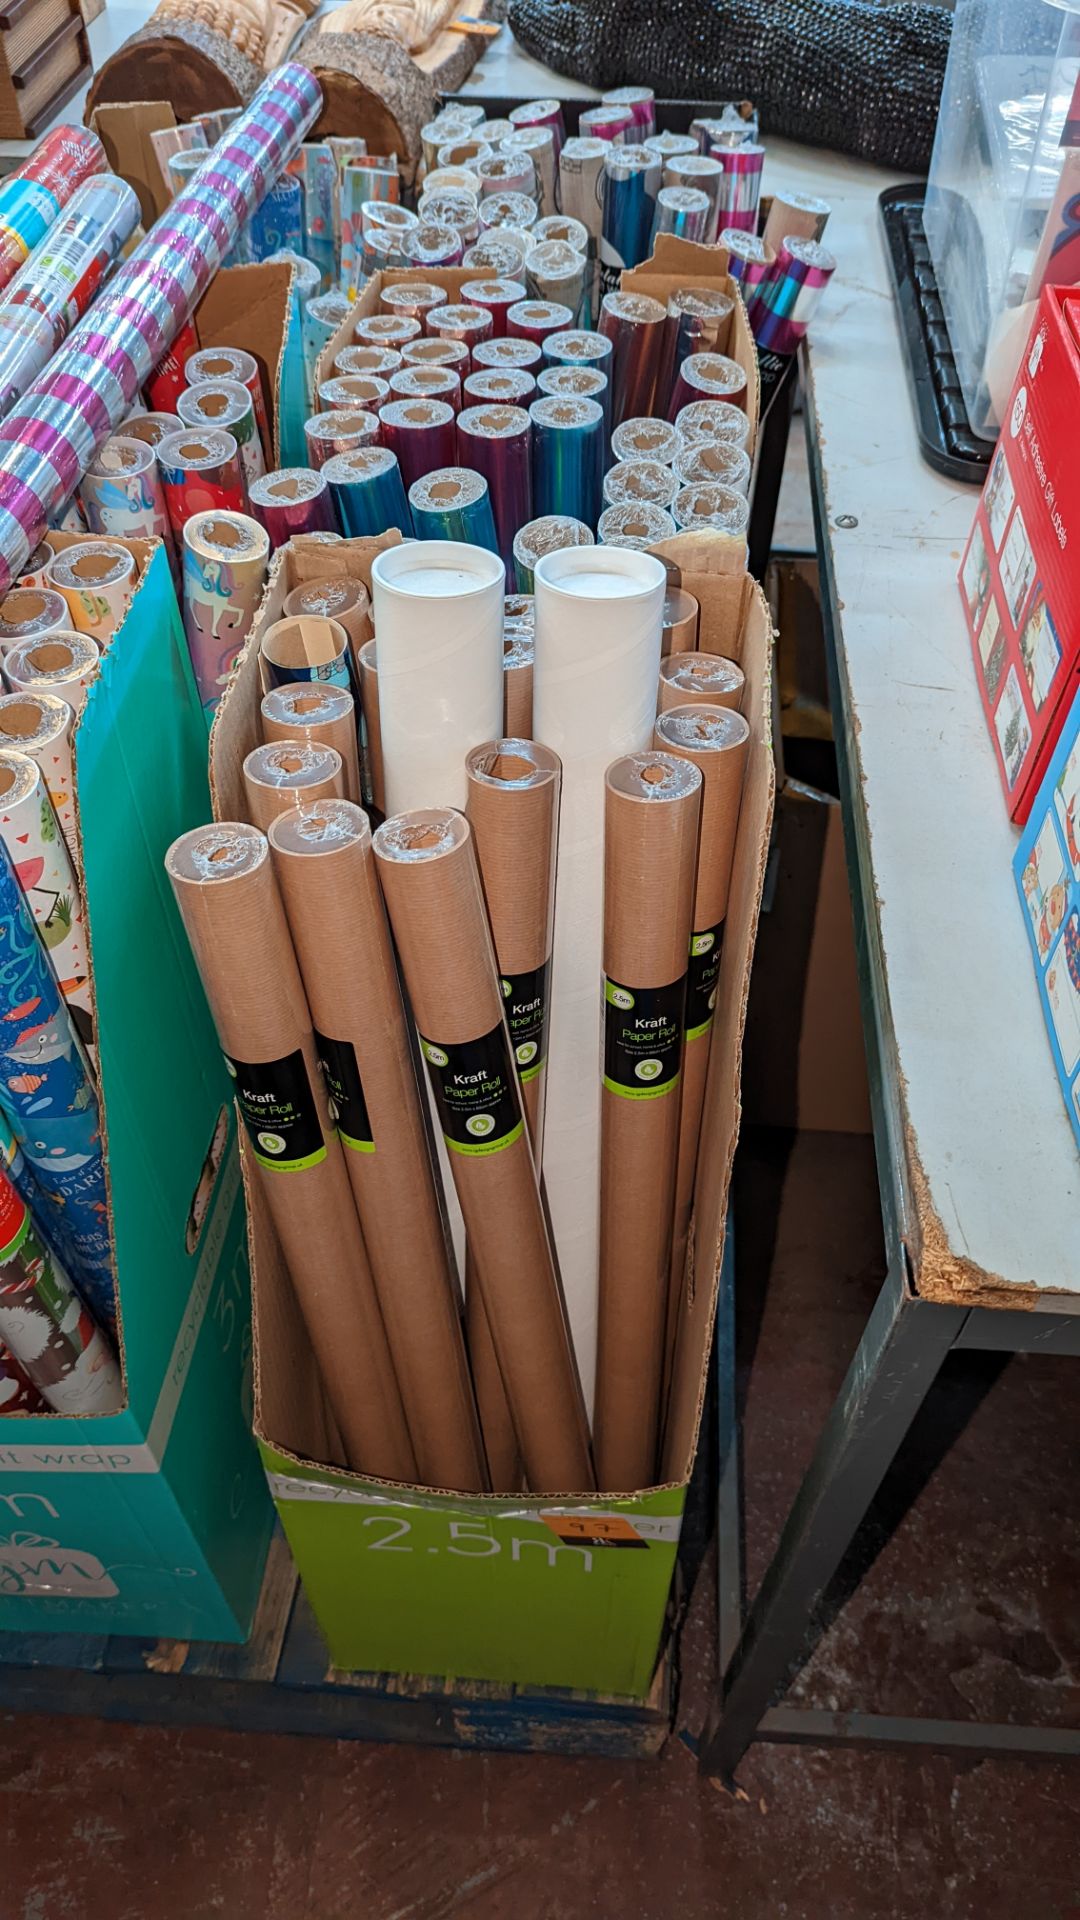 3 dispensers & their contents of gift wrap & paper roll - approx. 78 rolls of gift wrap in total